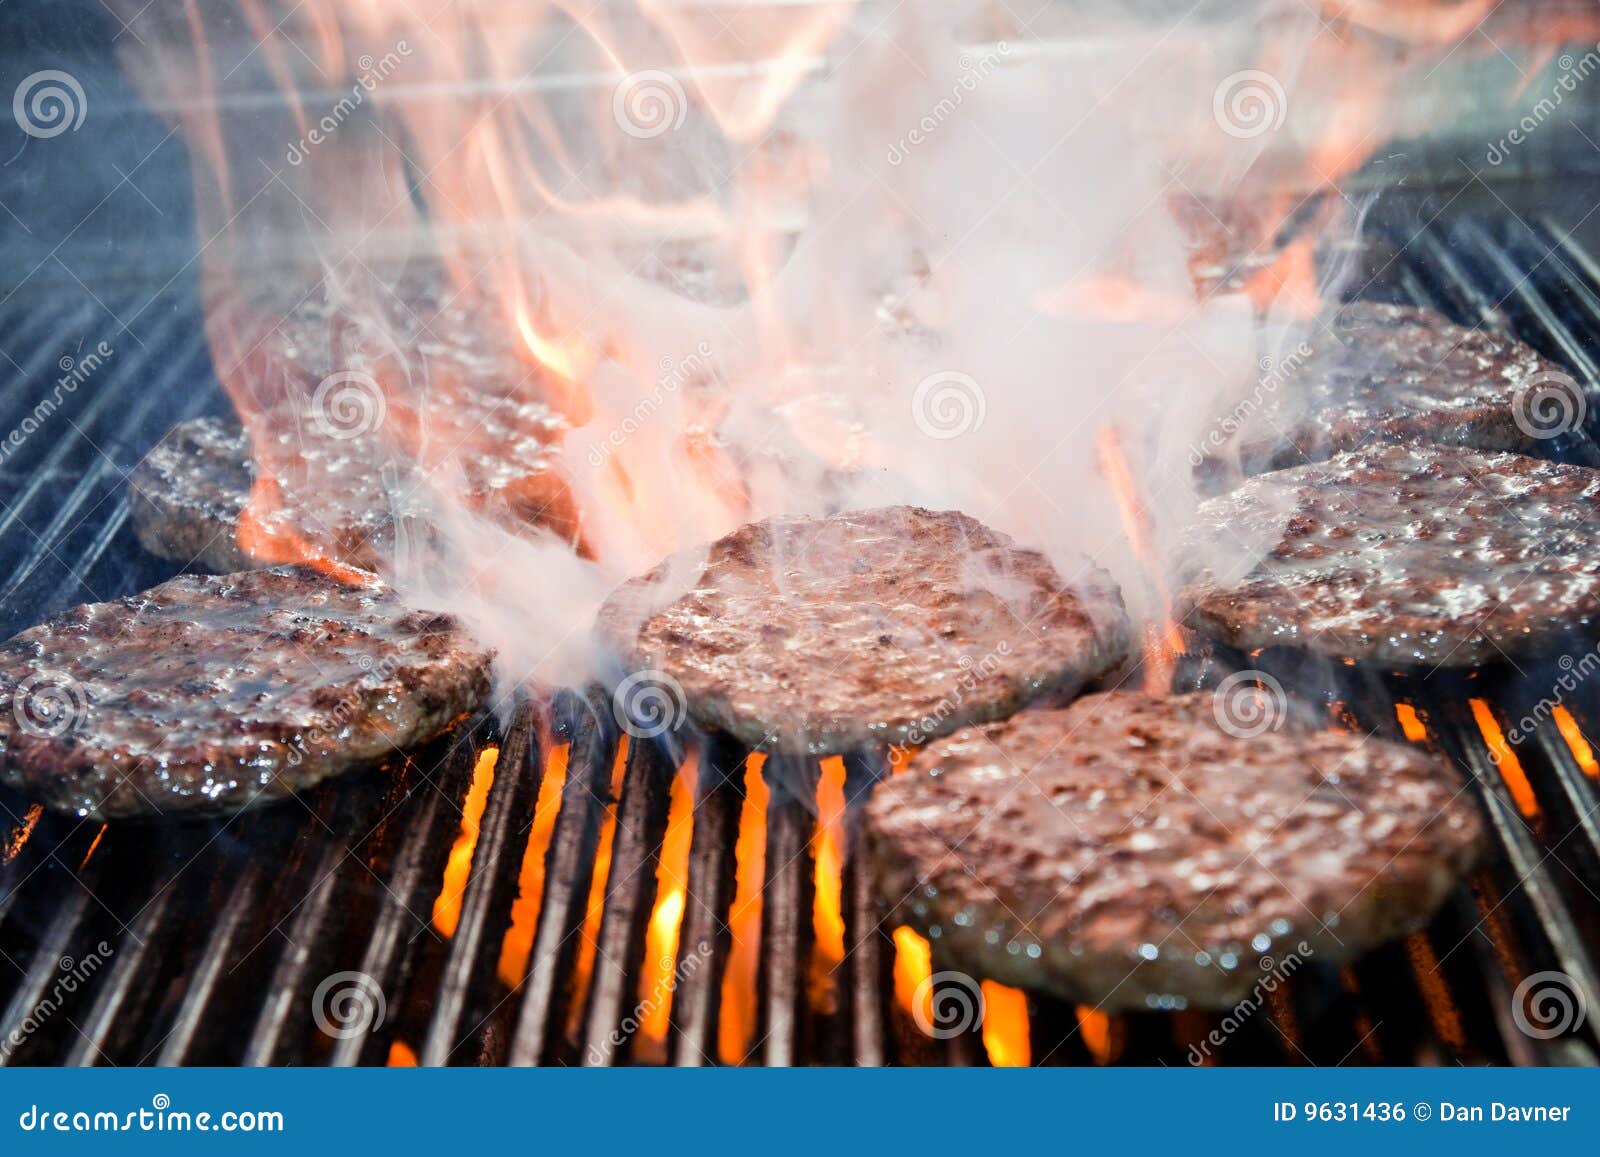 Hamburgers on the grill stock photo. Image of cook, outdoors - 9631436